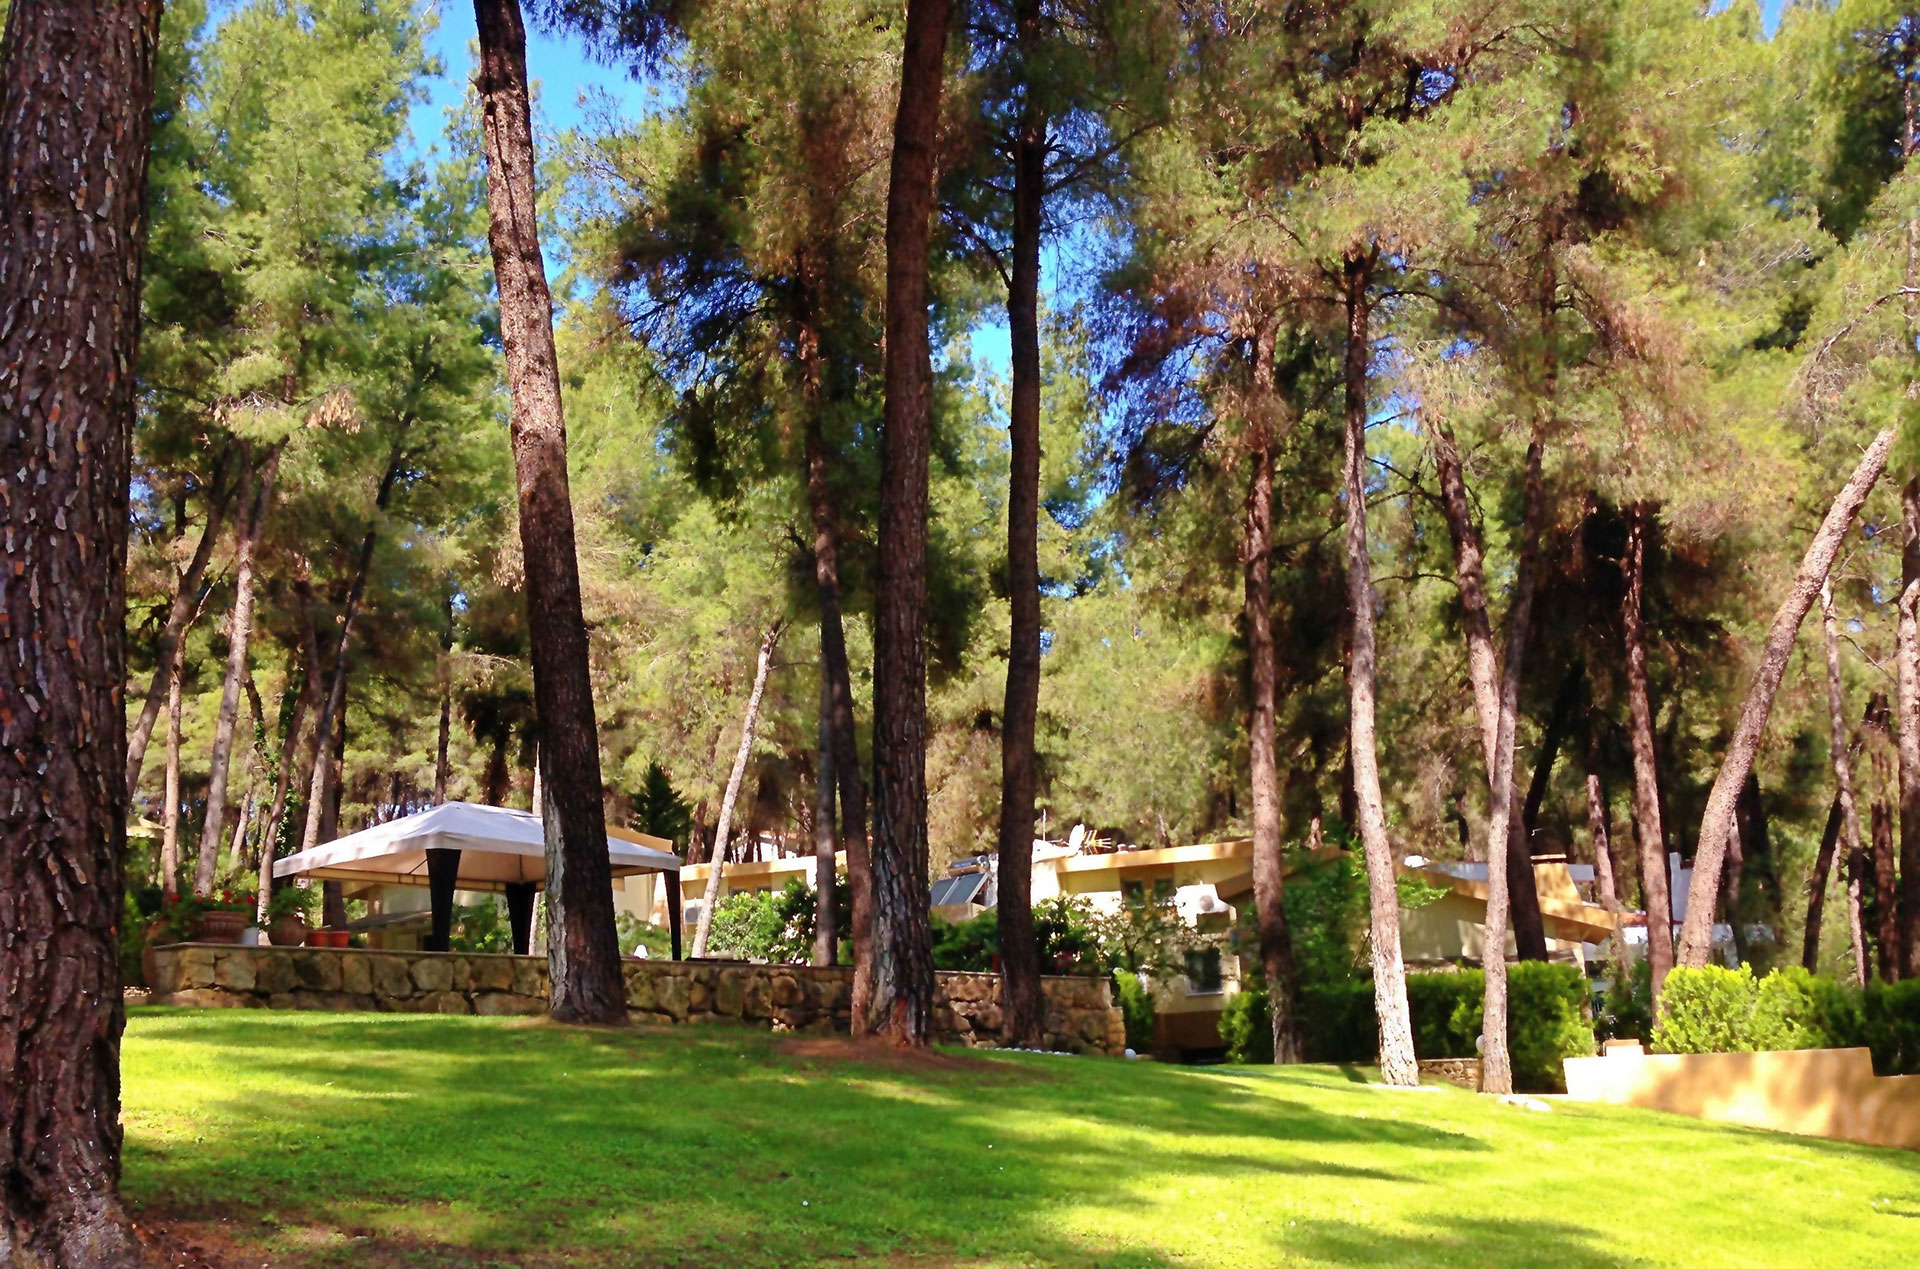 Sani Cape Villas - most of the green garden with tall pine-trees